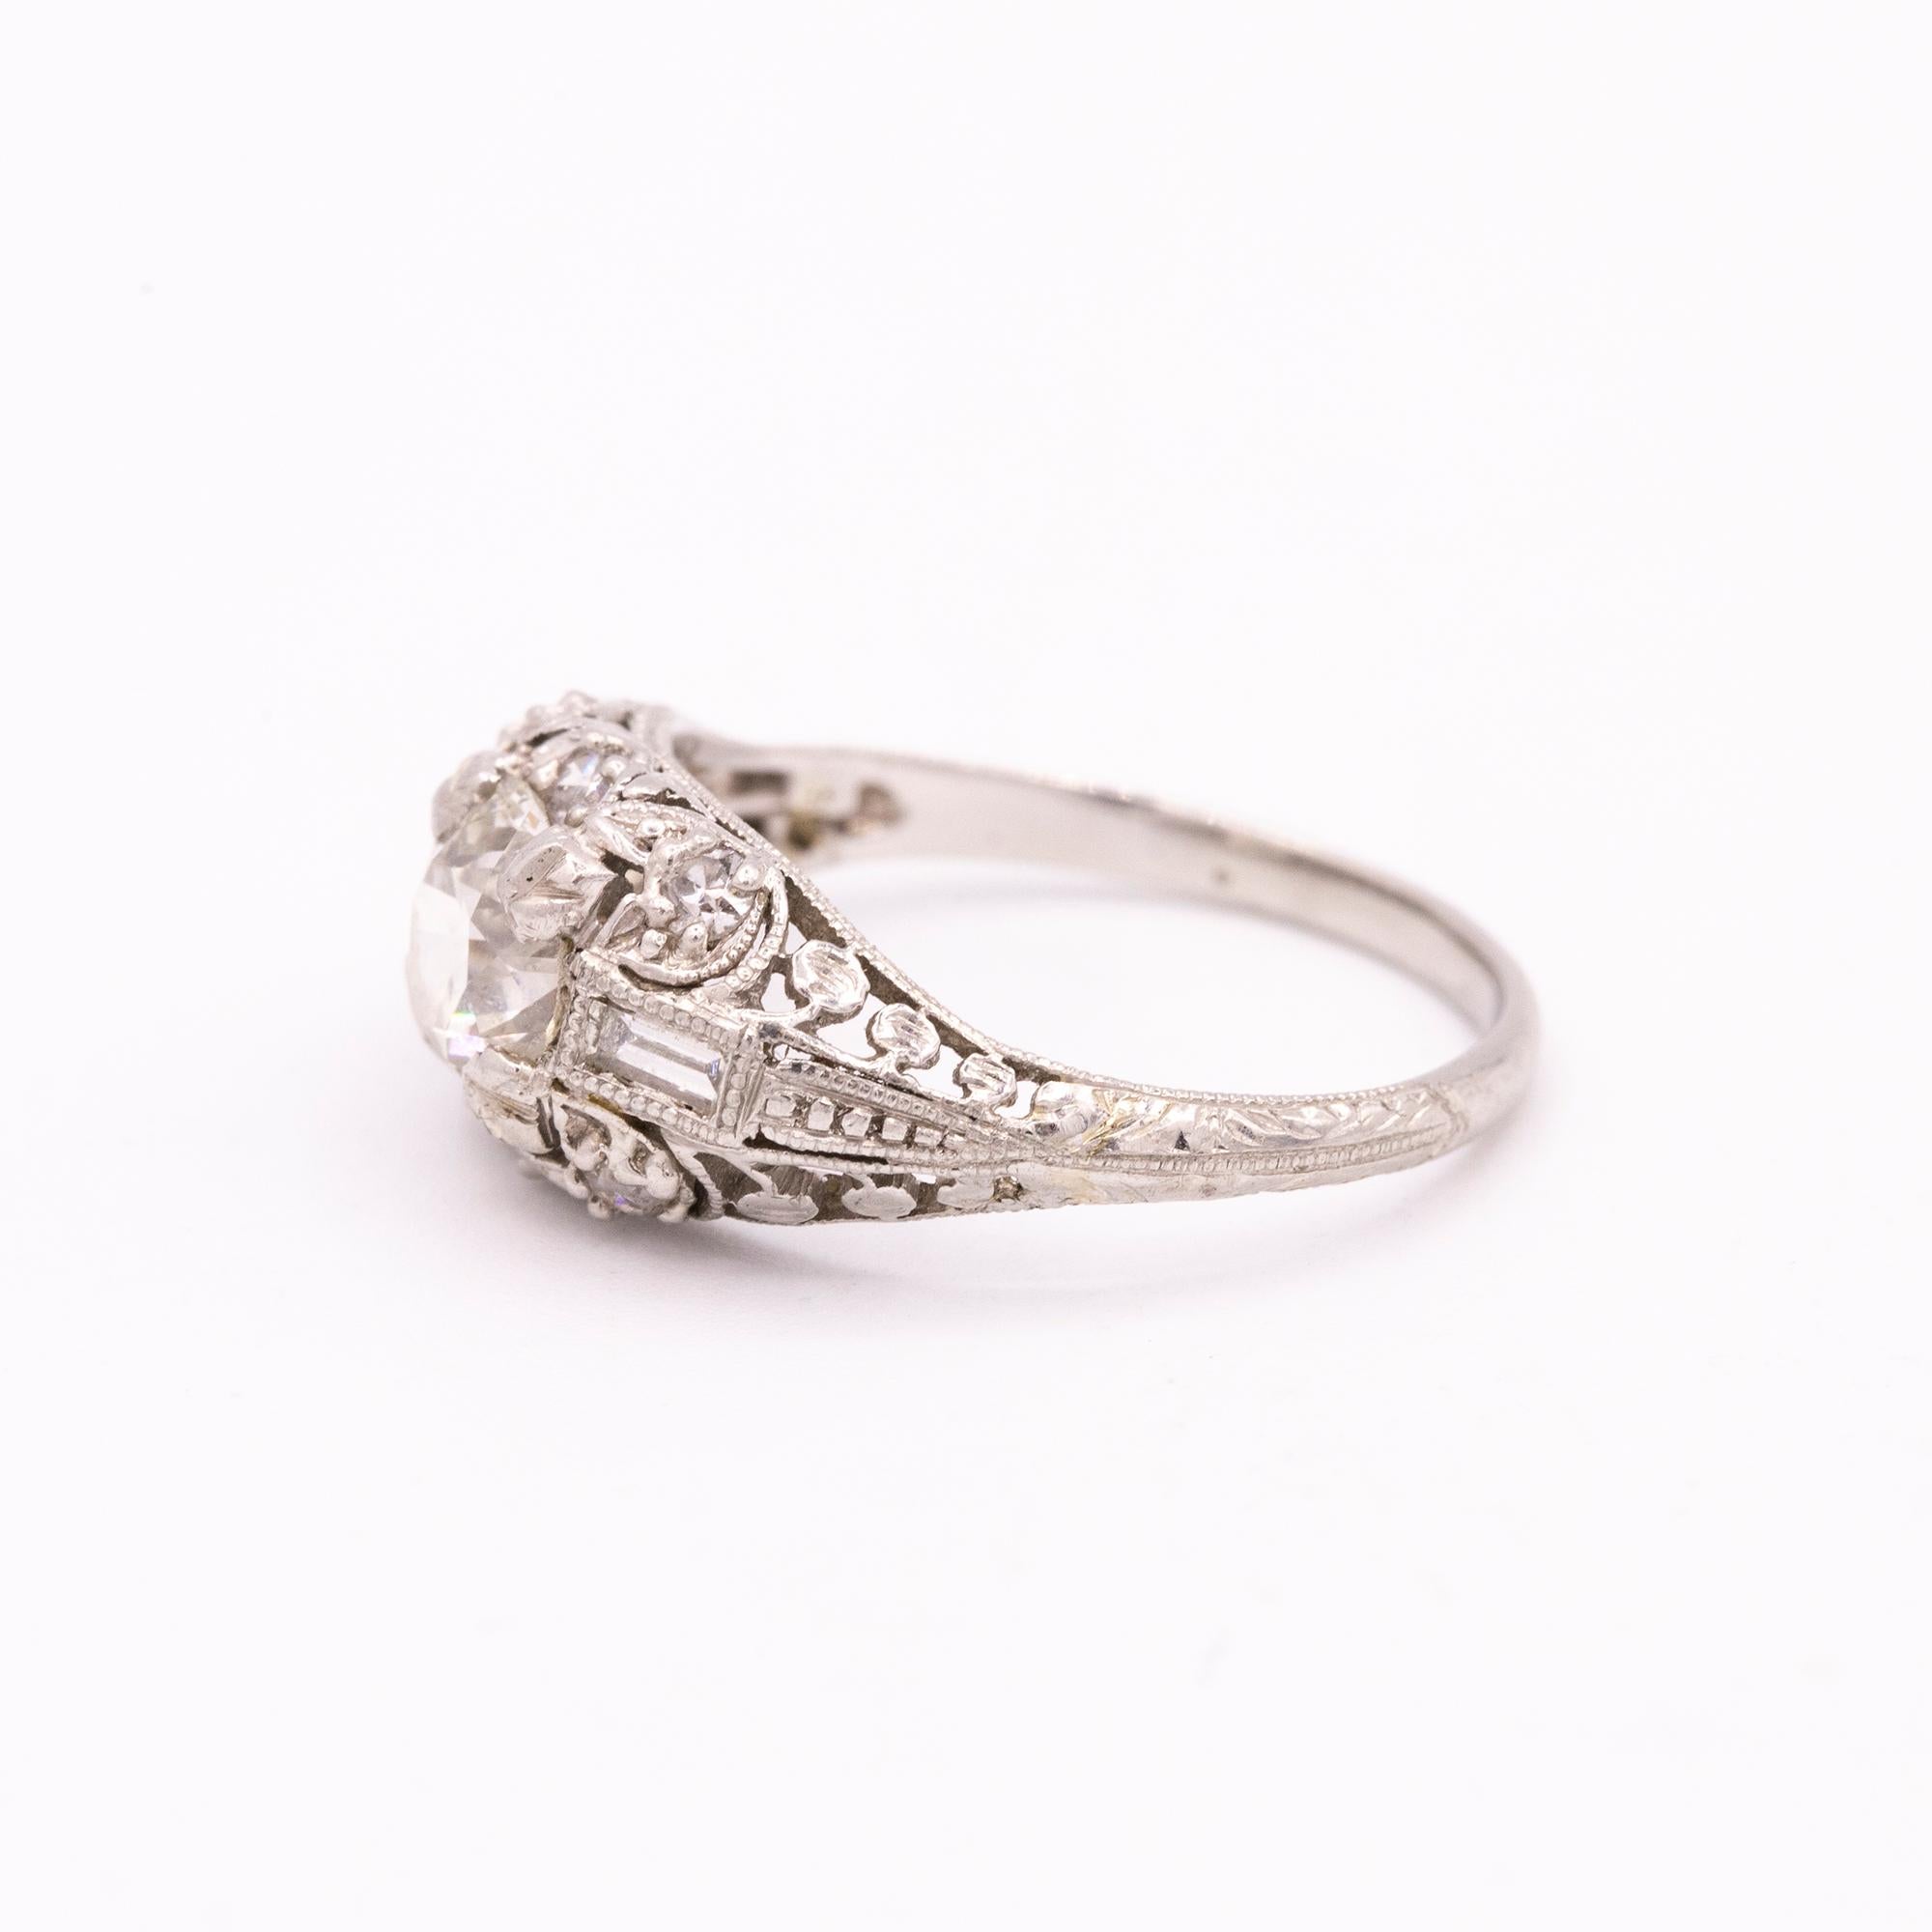 Vintage platinum diamond ring with filigree done by hand engraving. The center diamond weighs approximately 1.00 carat and the two baguette diamonds weigh a total of .36 carats. The side diamonds are G - I in color and VS in clarity. The center